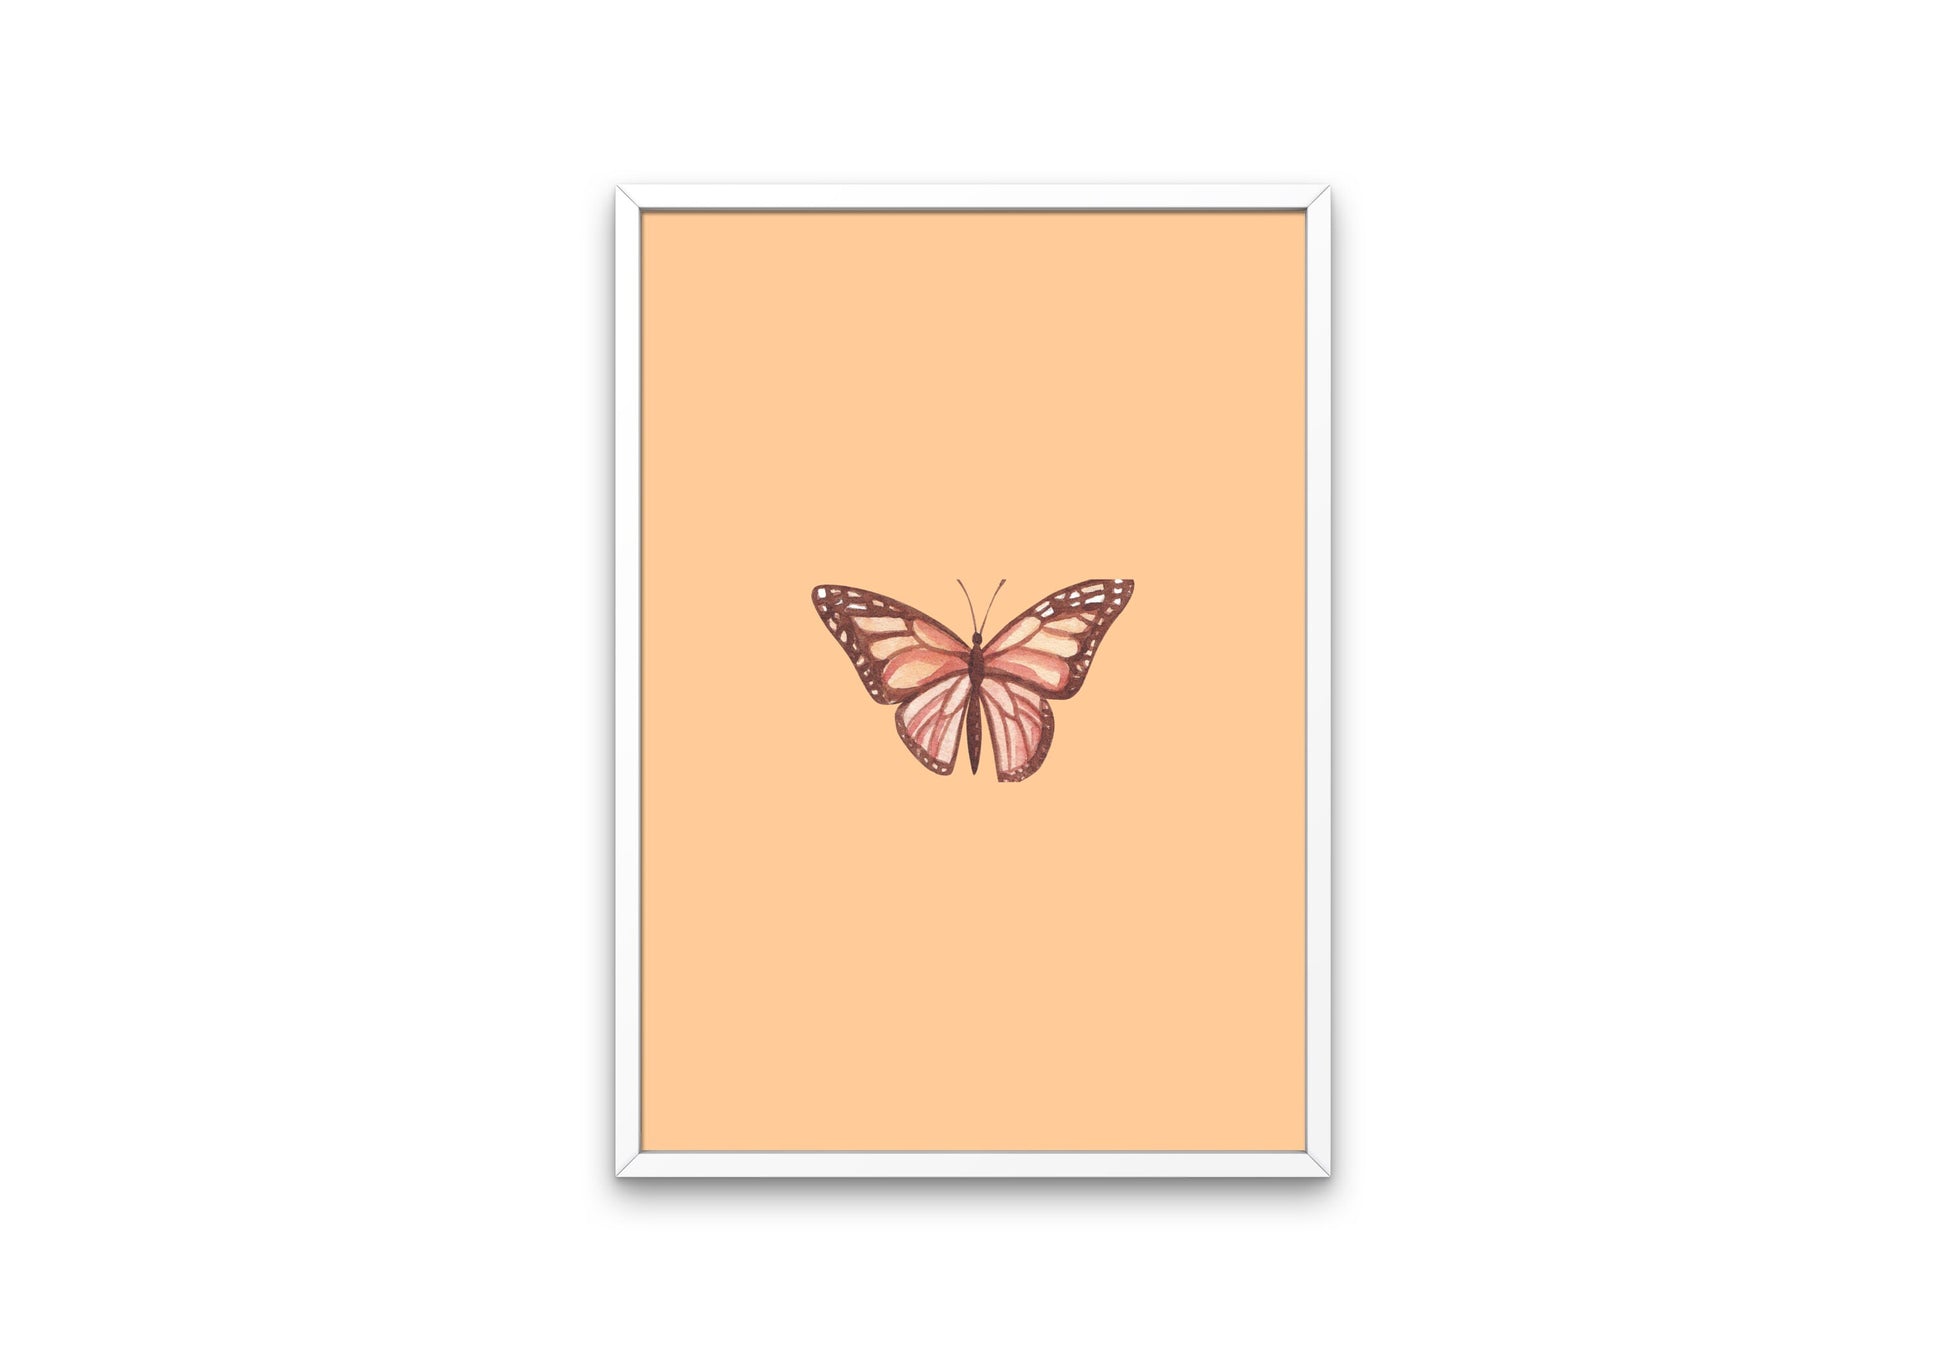 Danish Pastel Butterfly Posters Set of 7 INSTANT DOWNLOAD, Boho Butterfly Print, y2k Room Décor, Danish Pastel Prints, Botanical Wall Art